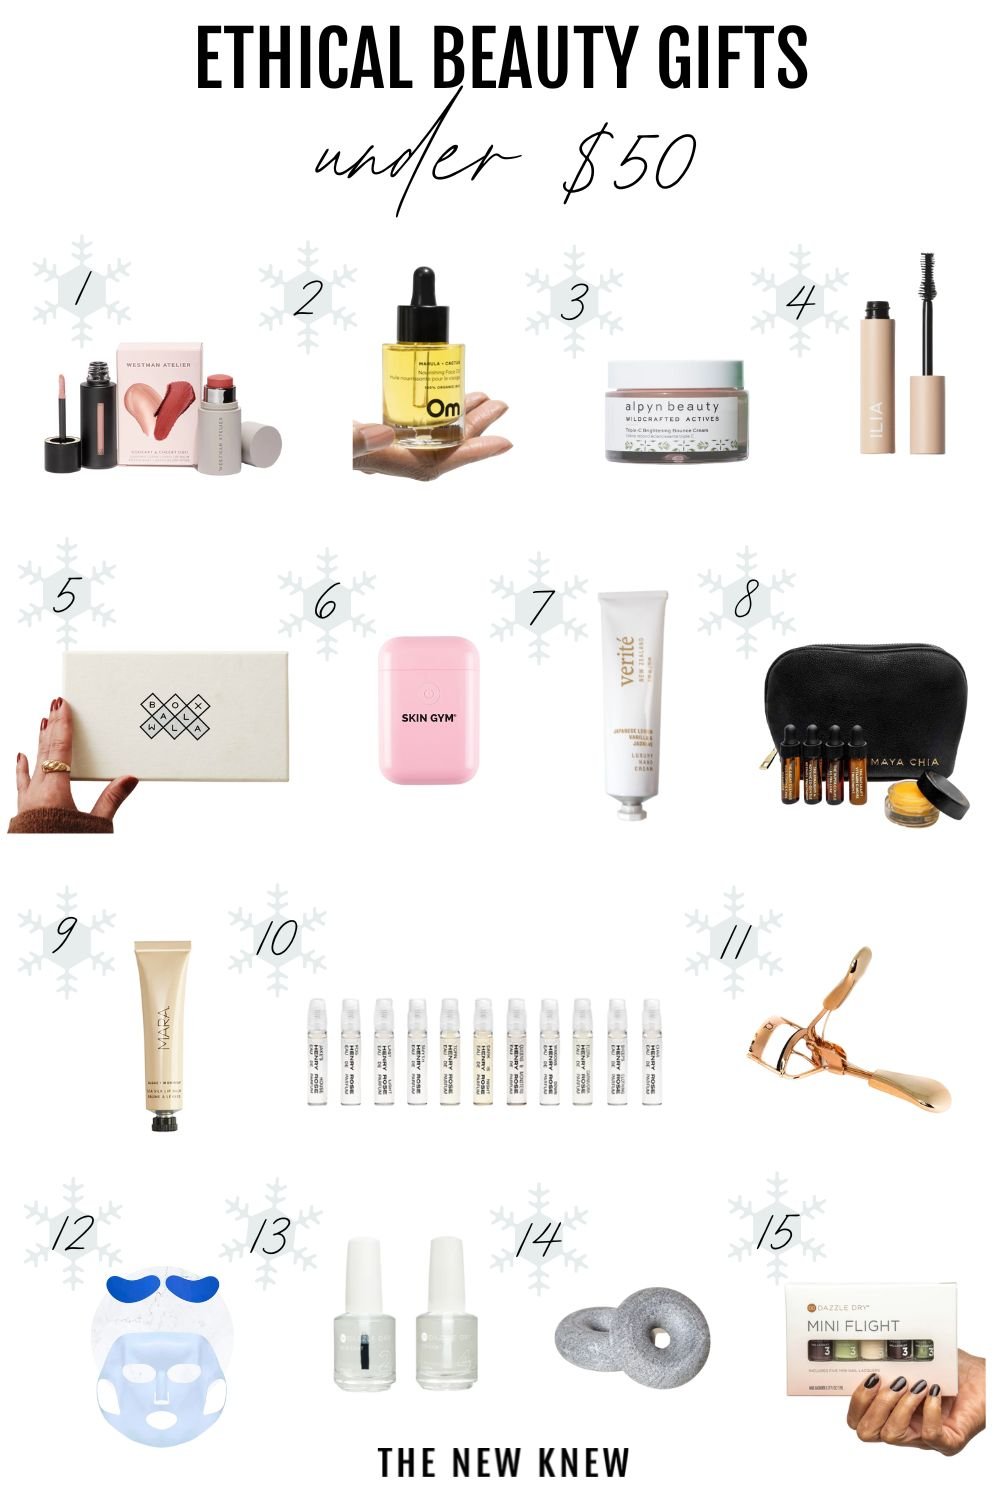 A collection of ethical beauty gifts under $50